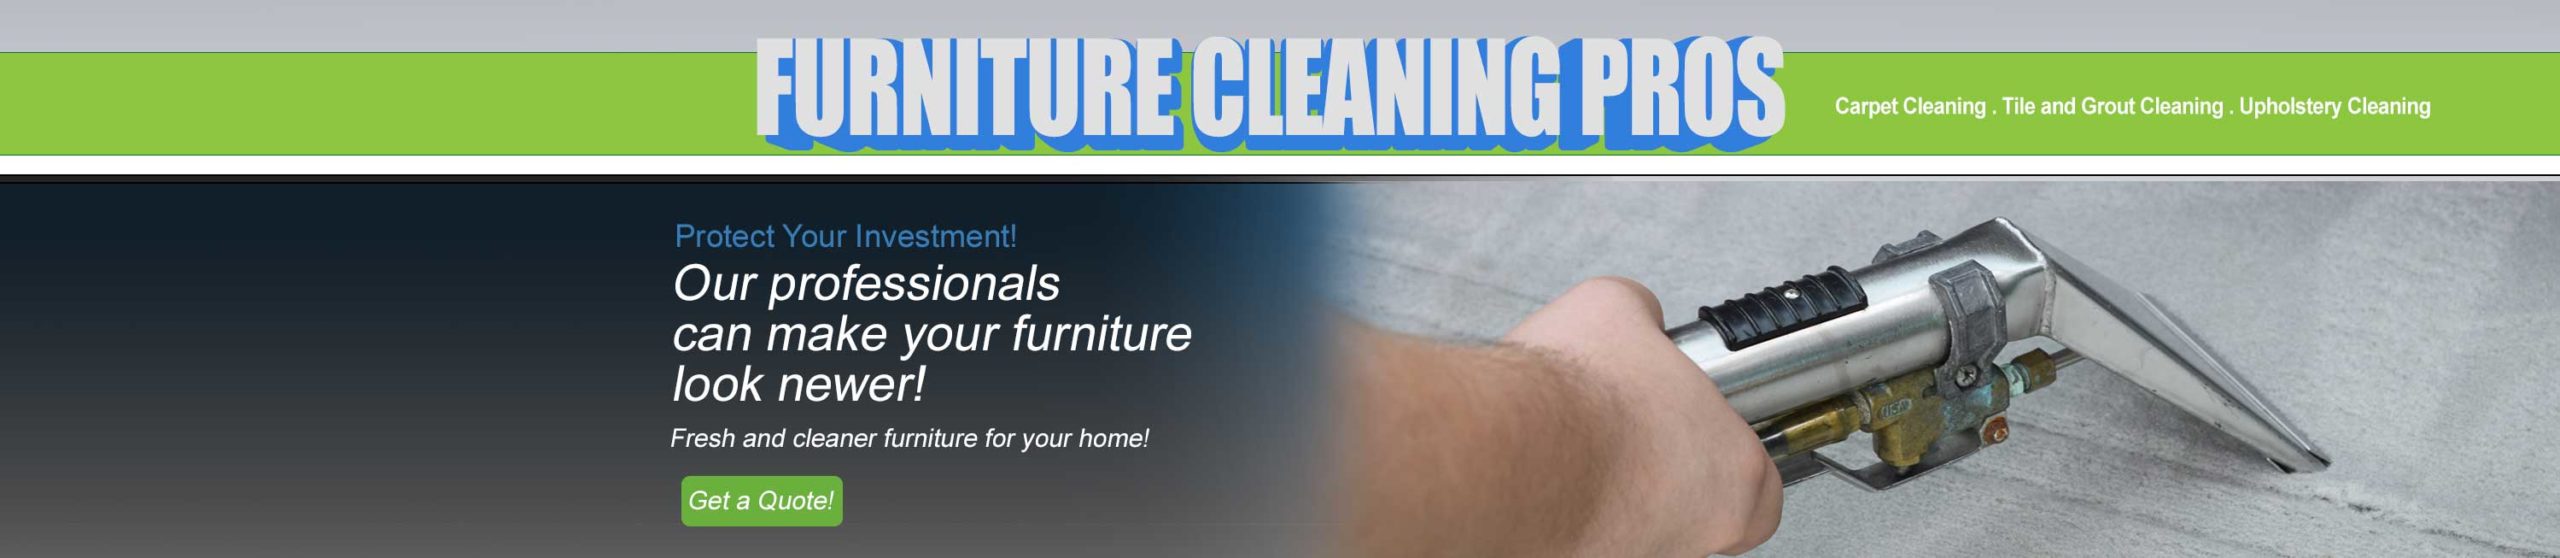 Furniture and upholstery cleaning in Anthem AZ